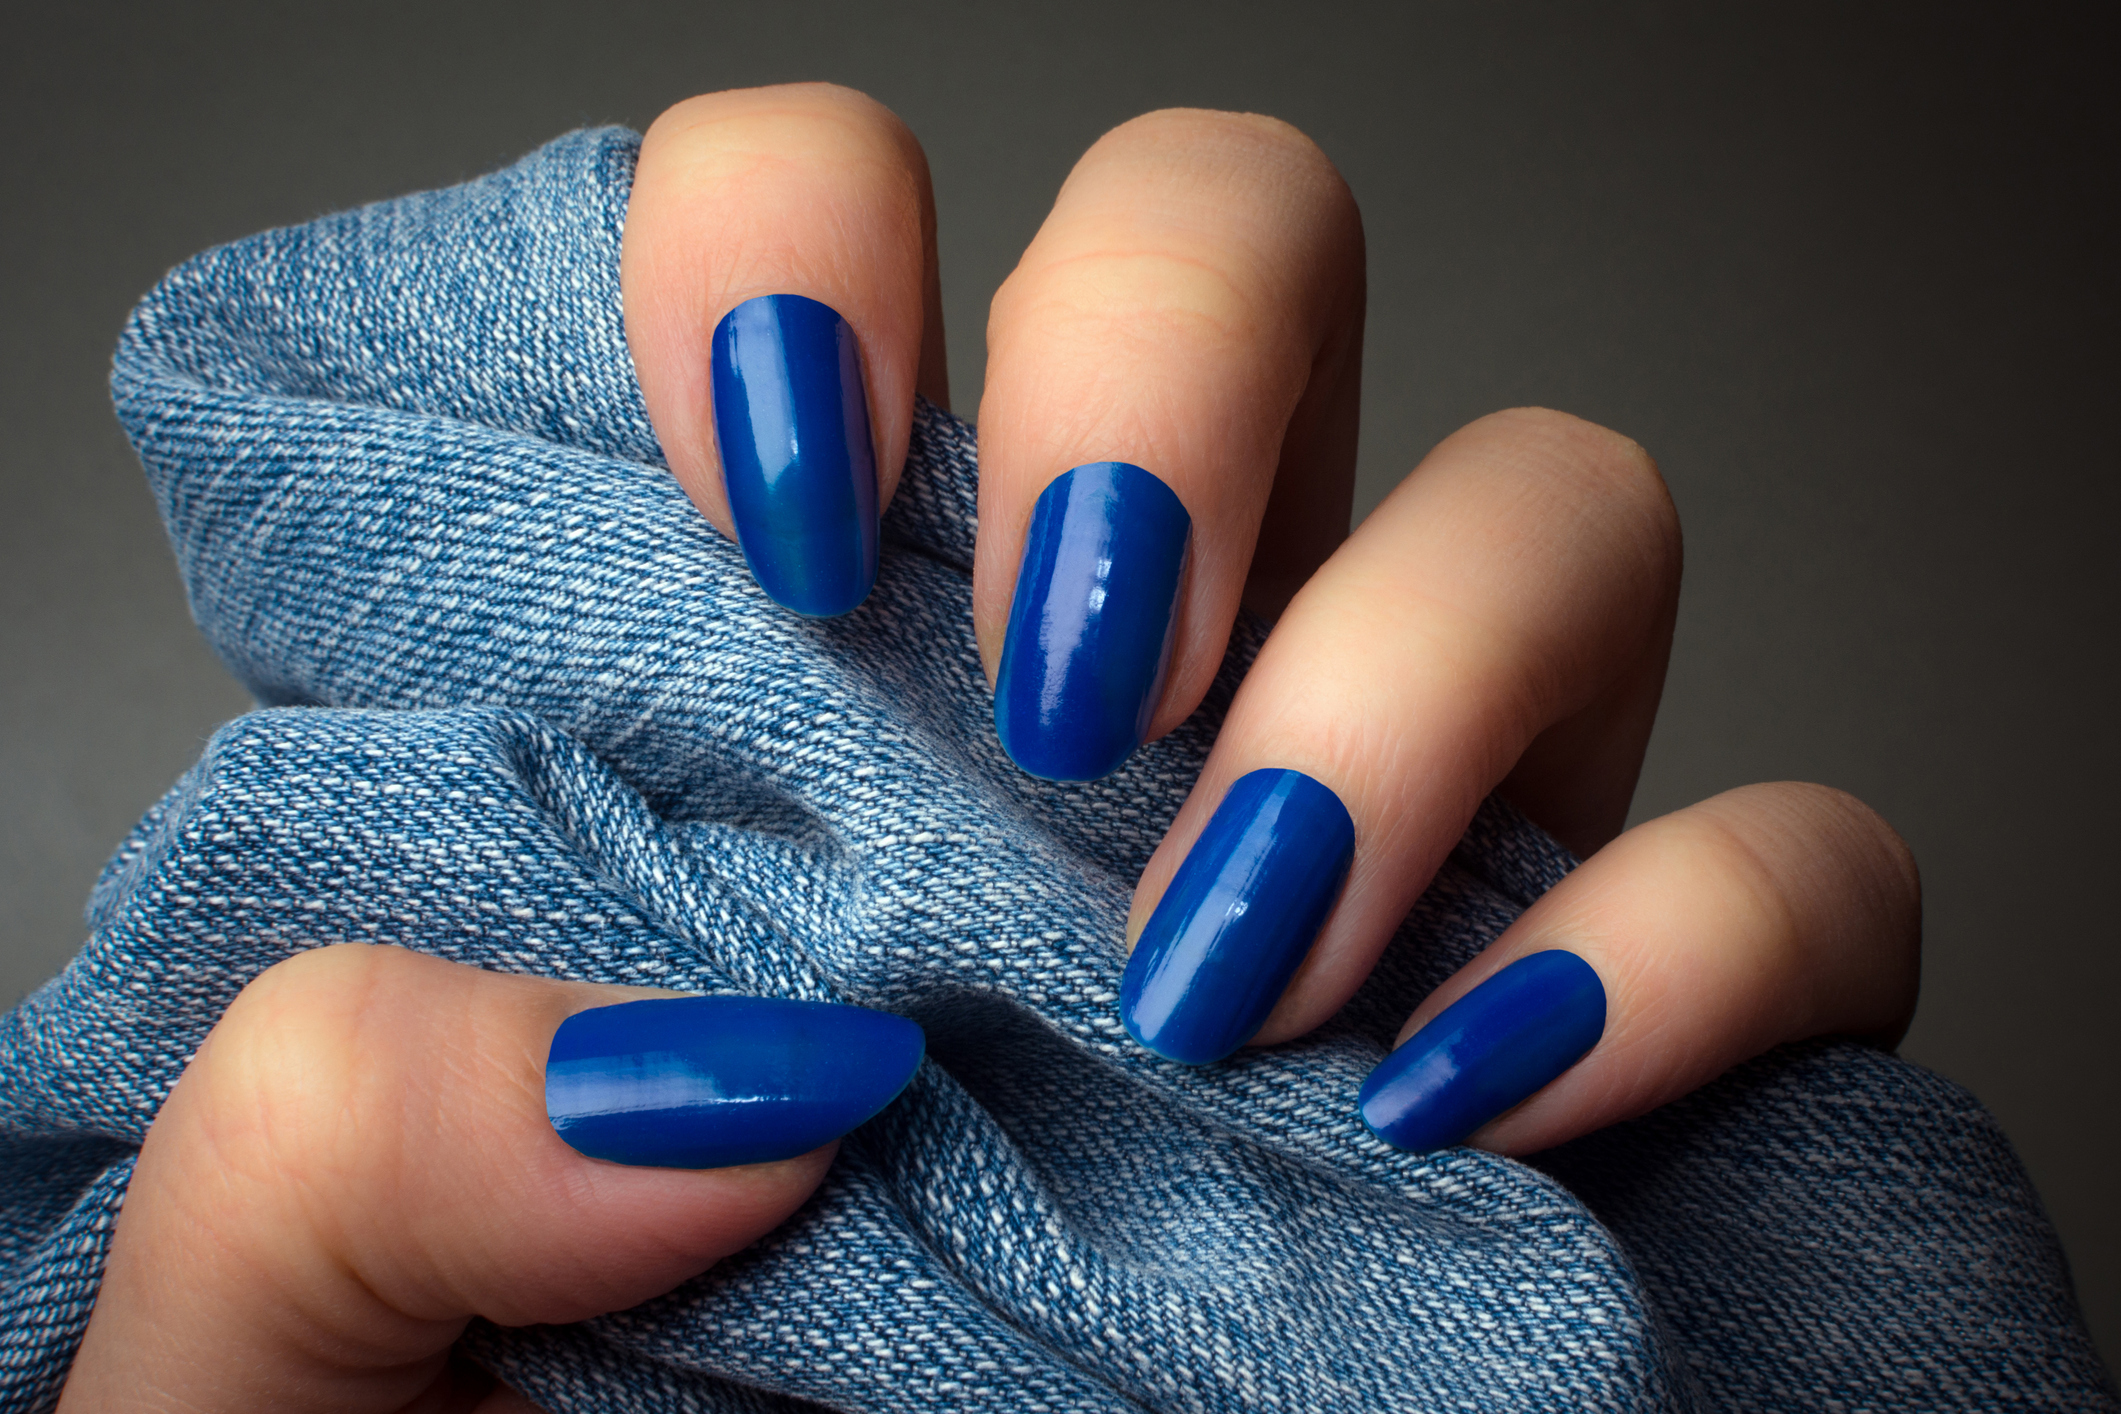 Why Do My Hands Turn Blue When They're Cold? | Blue nails, Blue fingers,  Hand health